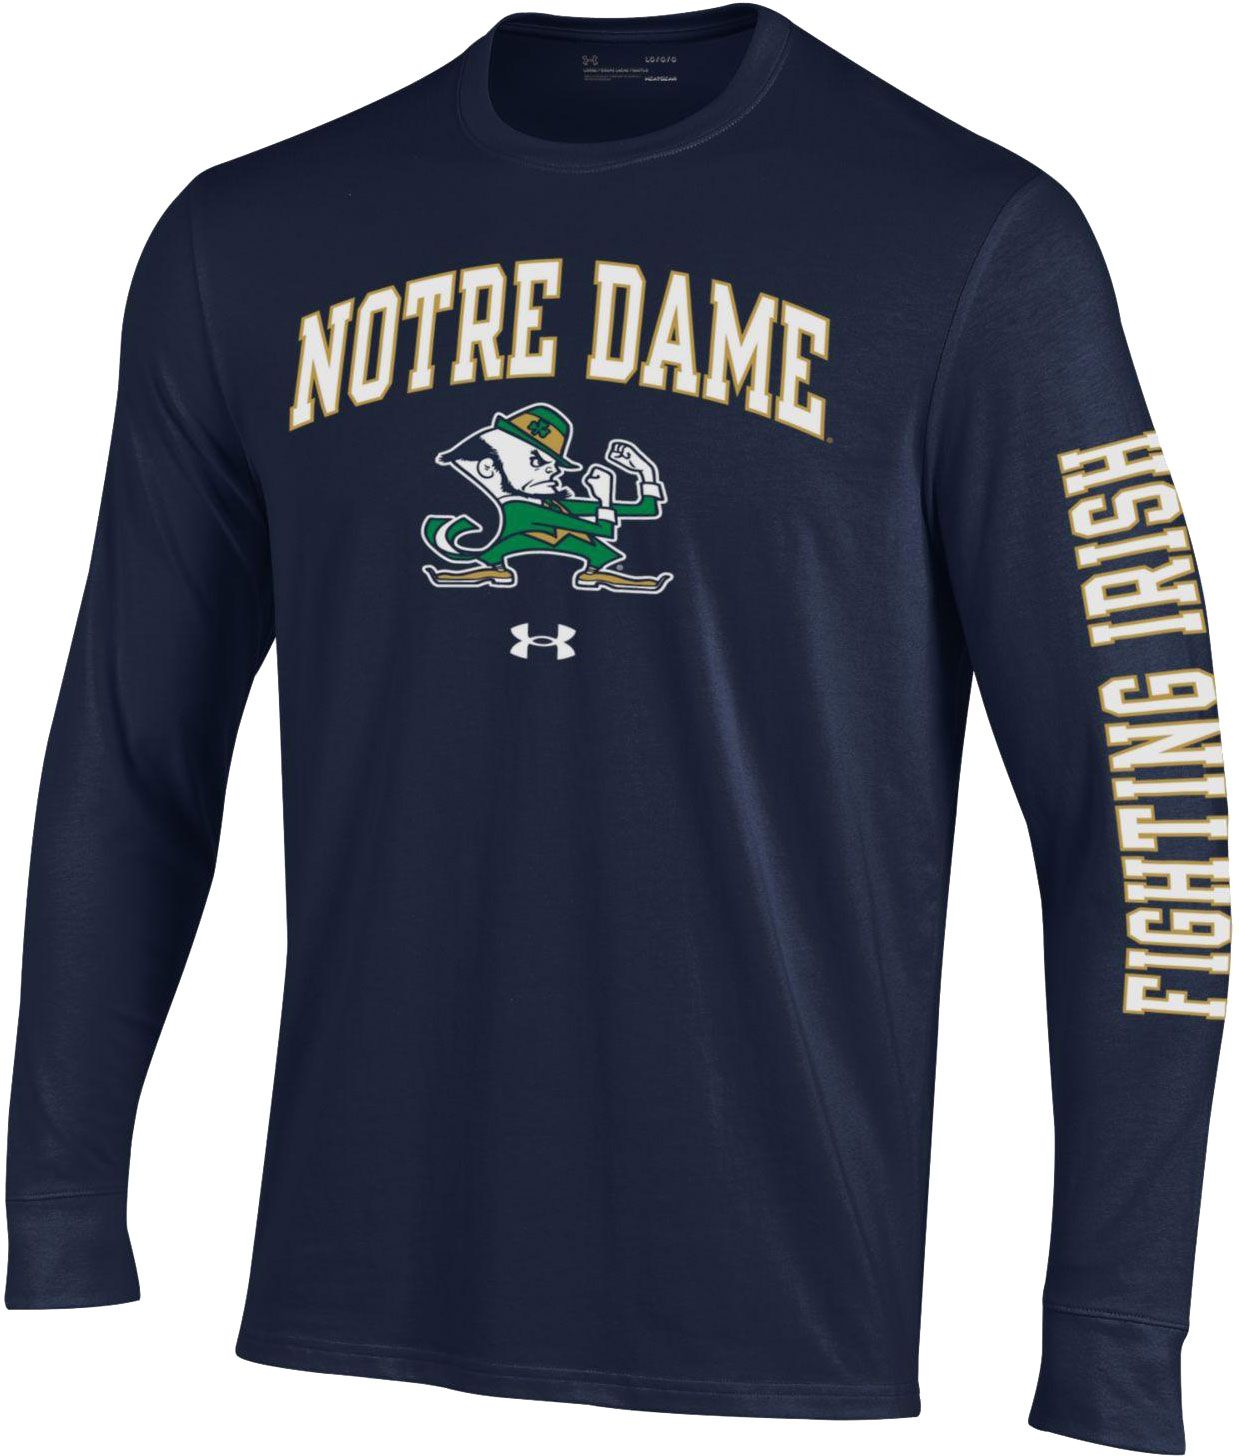 notre dame under armour long sleeve